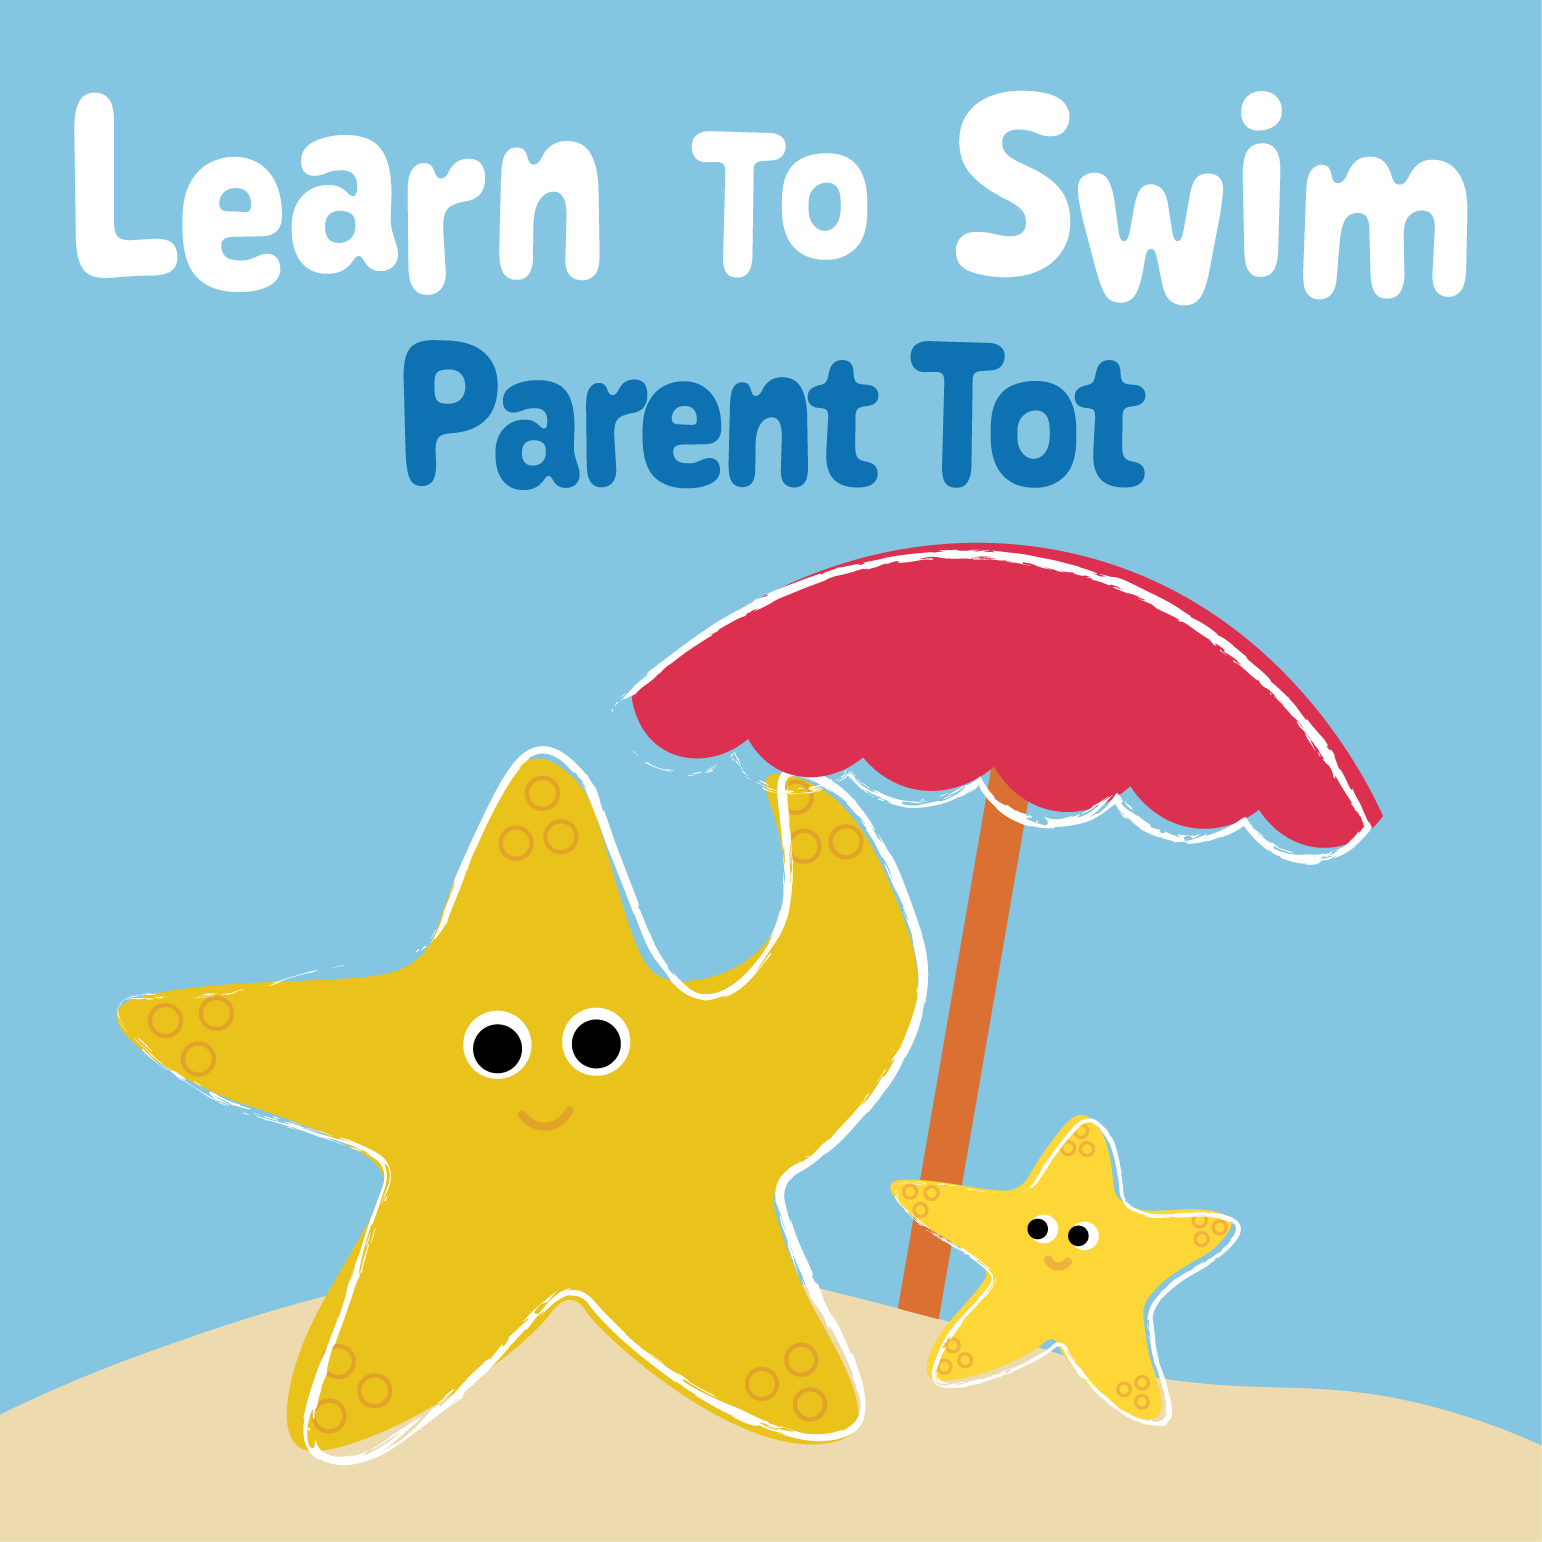 icon with a parent and child starfish under an umbrella with the text "learn to swim; parent tot"